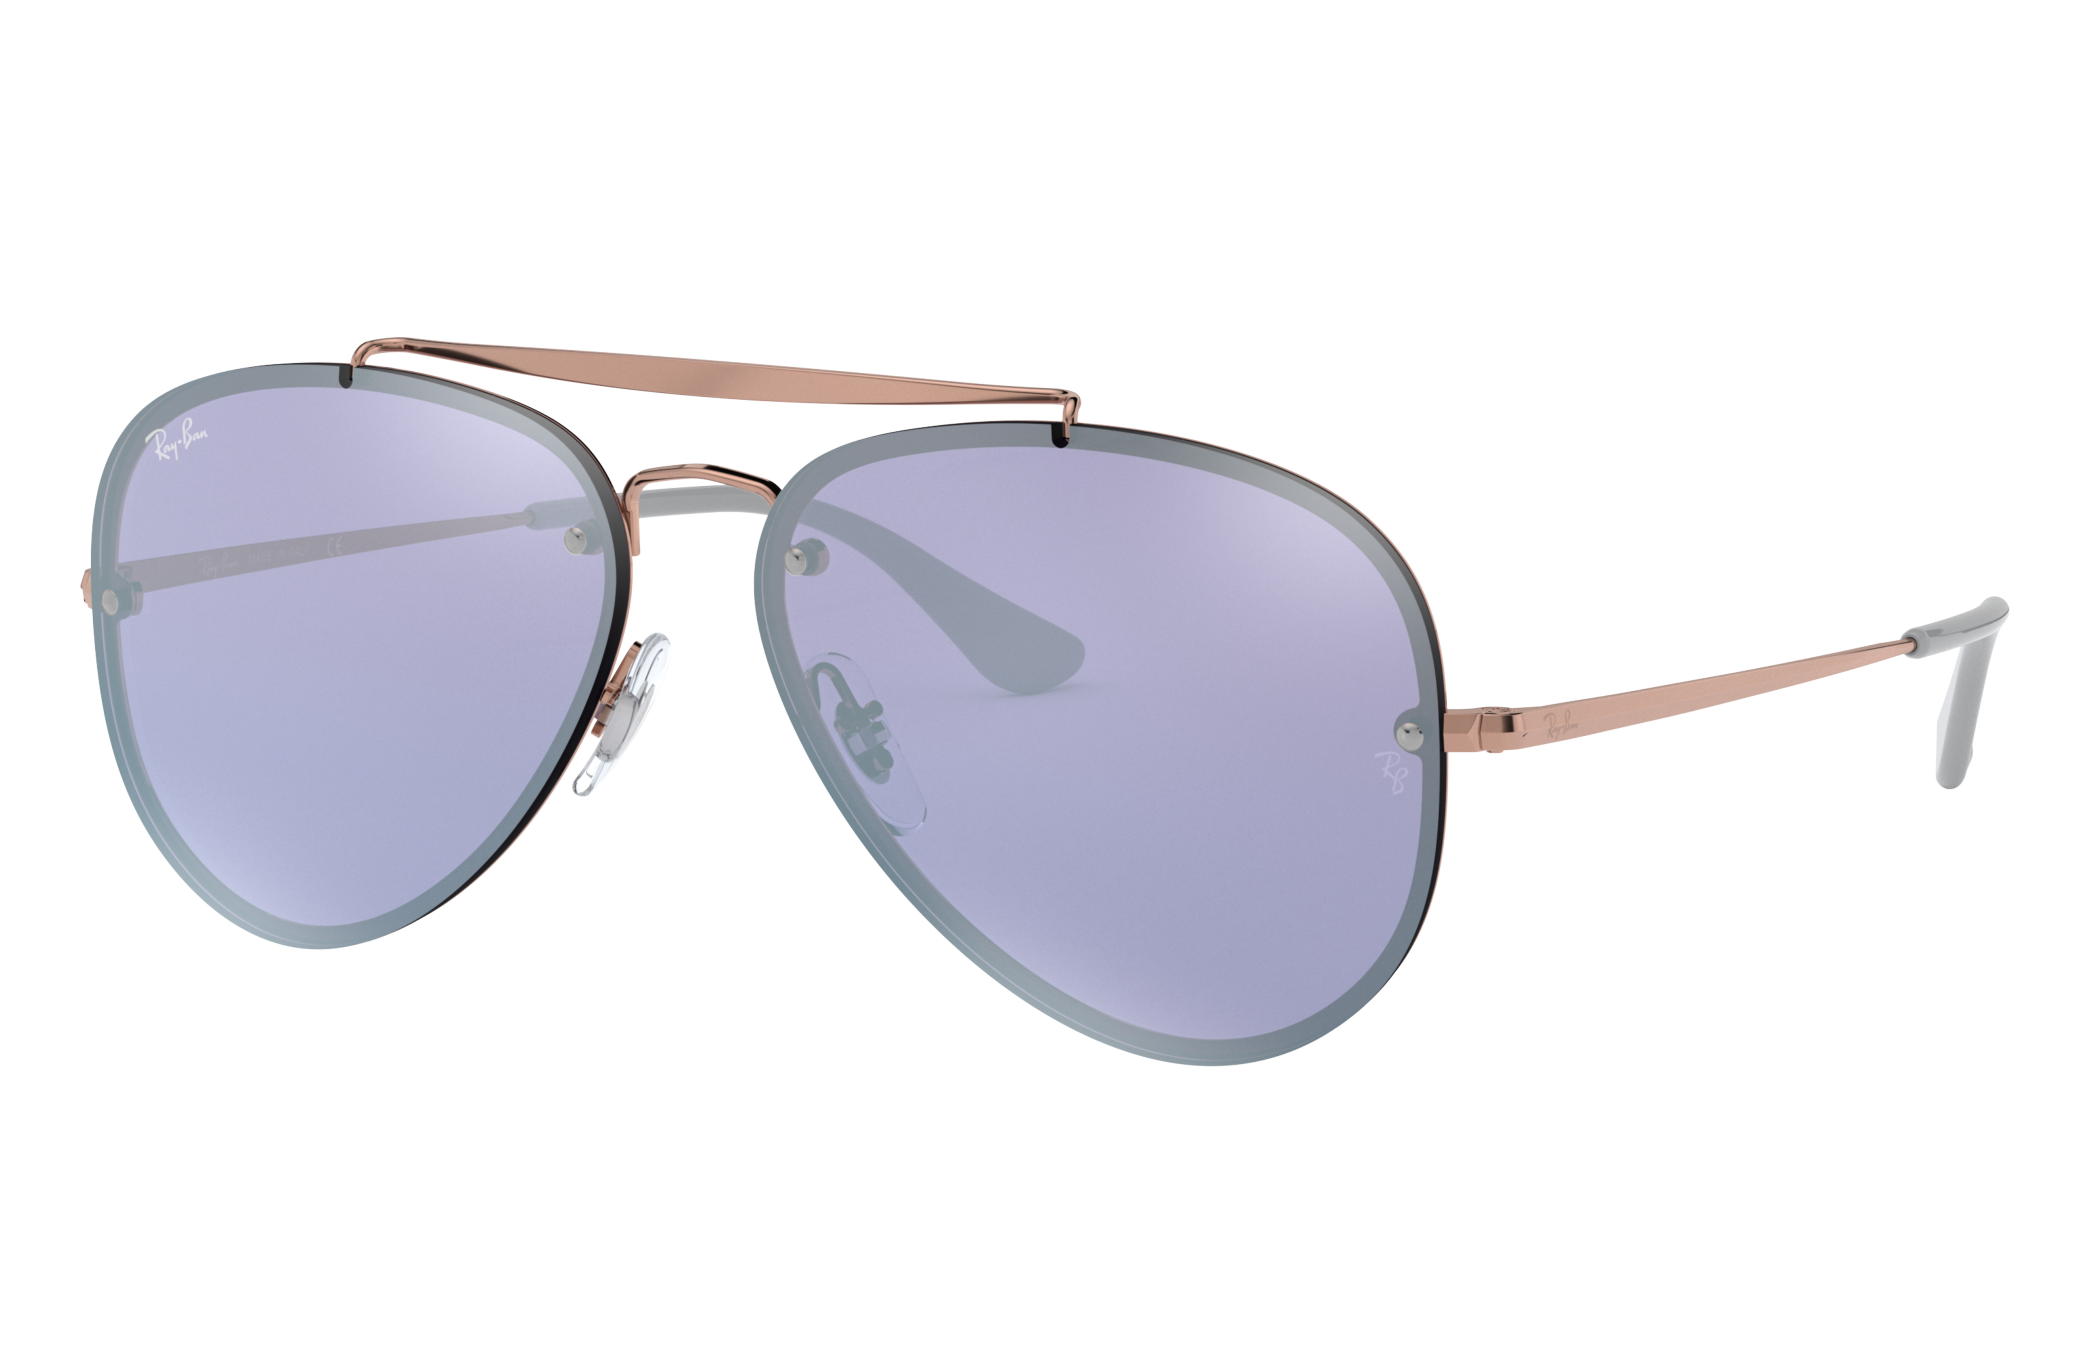 Blaze Aviator Sunglasses in Copper and Violet | Ray-Ban®